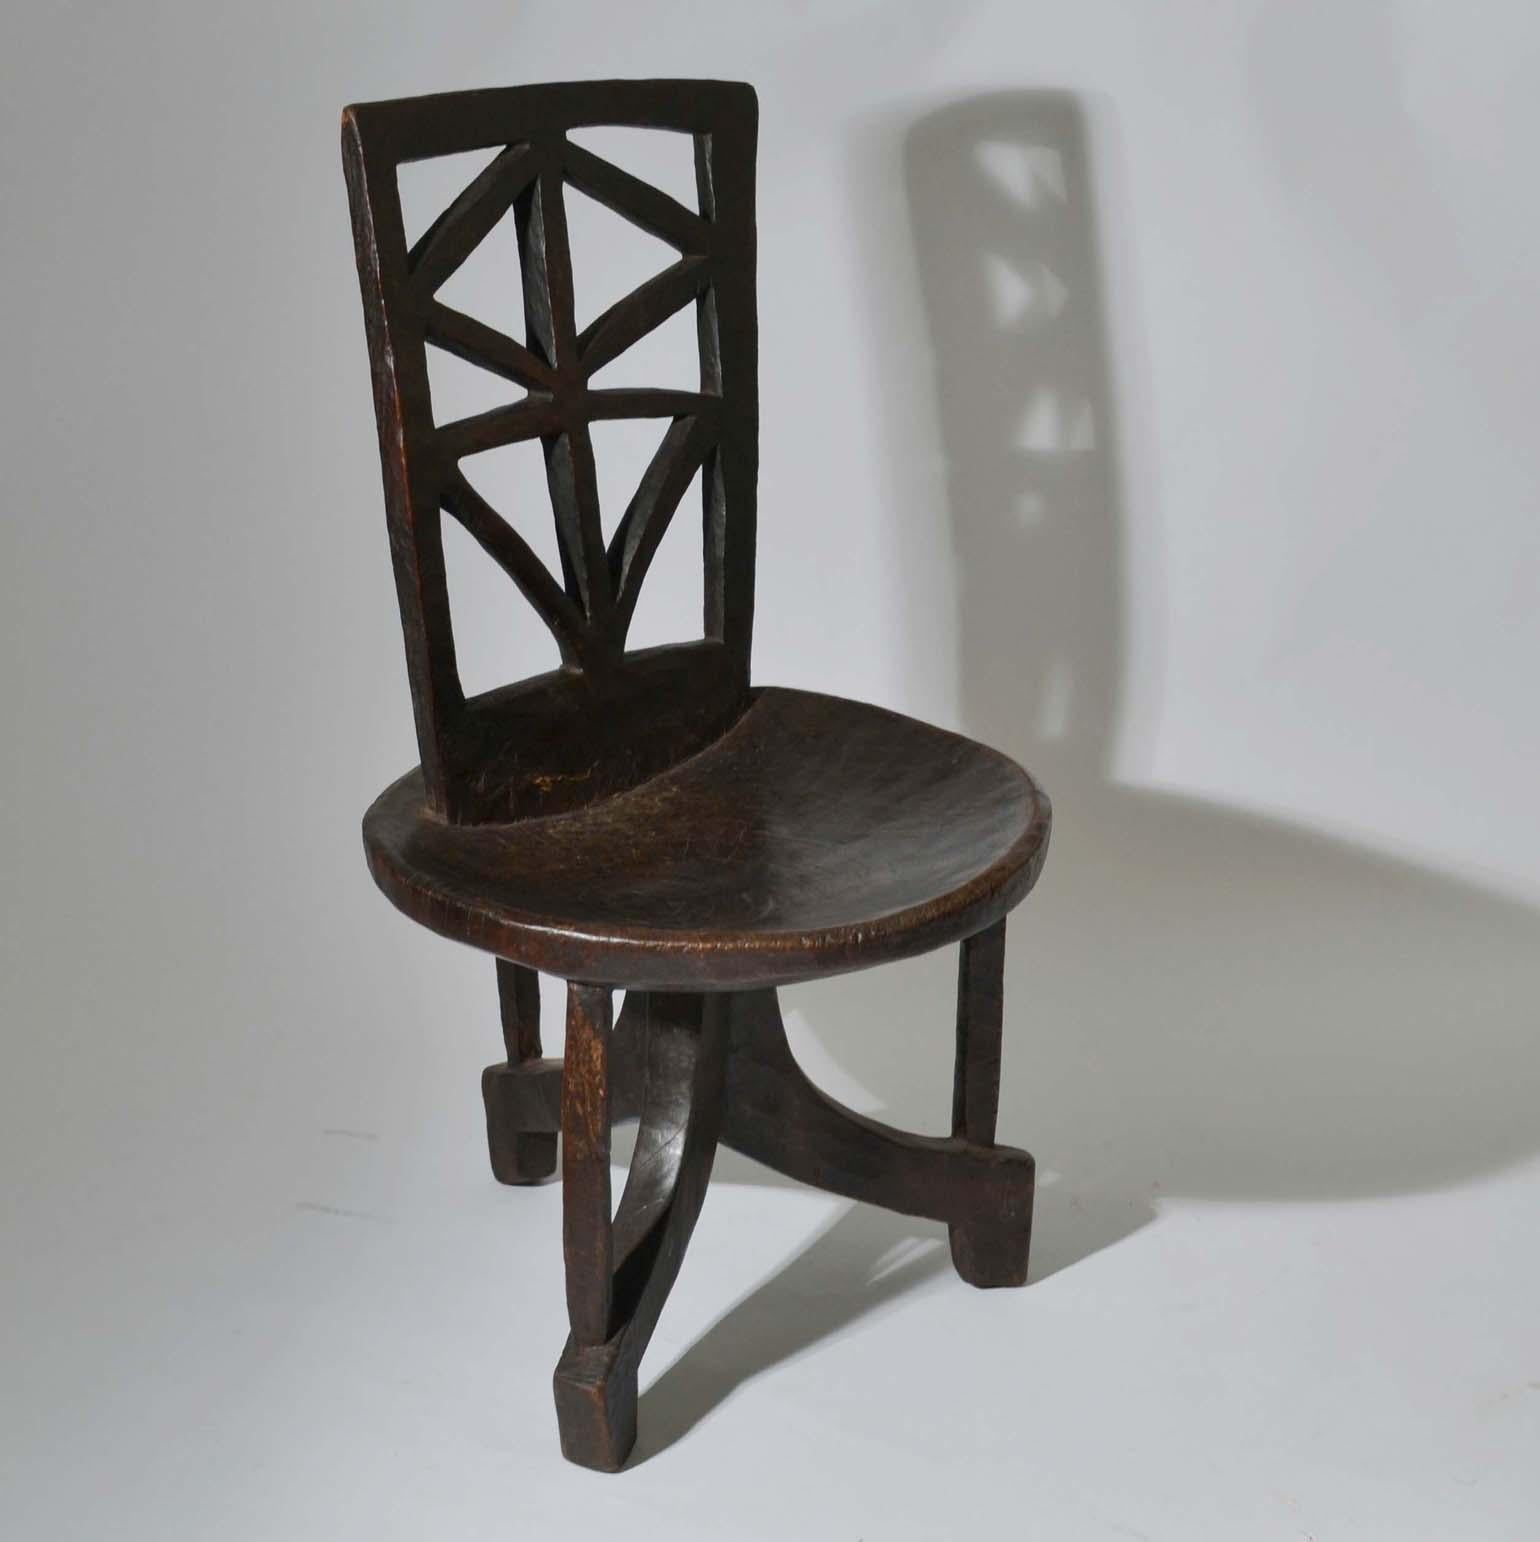 Two 1960s geometric high back Ethiopian chairs and a stool are all hand carved from one piece of wood. Circular, slightly concave seat on curved tripod base rectangular, backrest with geometric openwork carving and the dark wood has a fabulous shiny